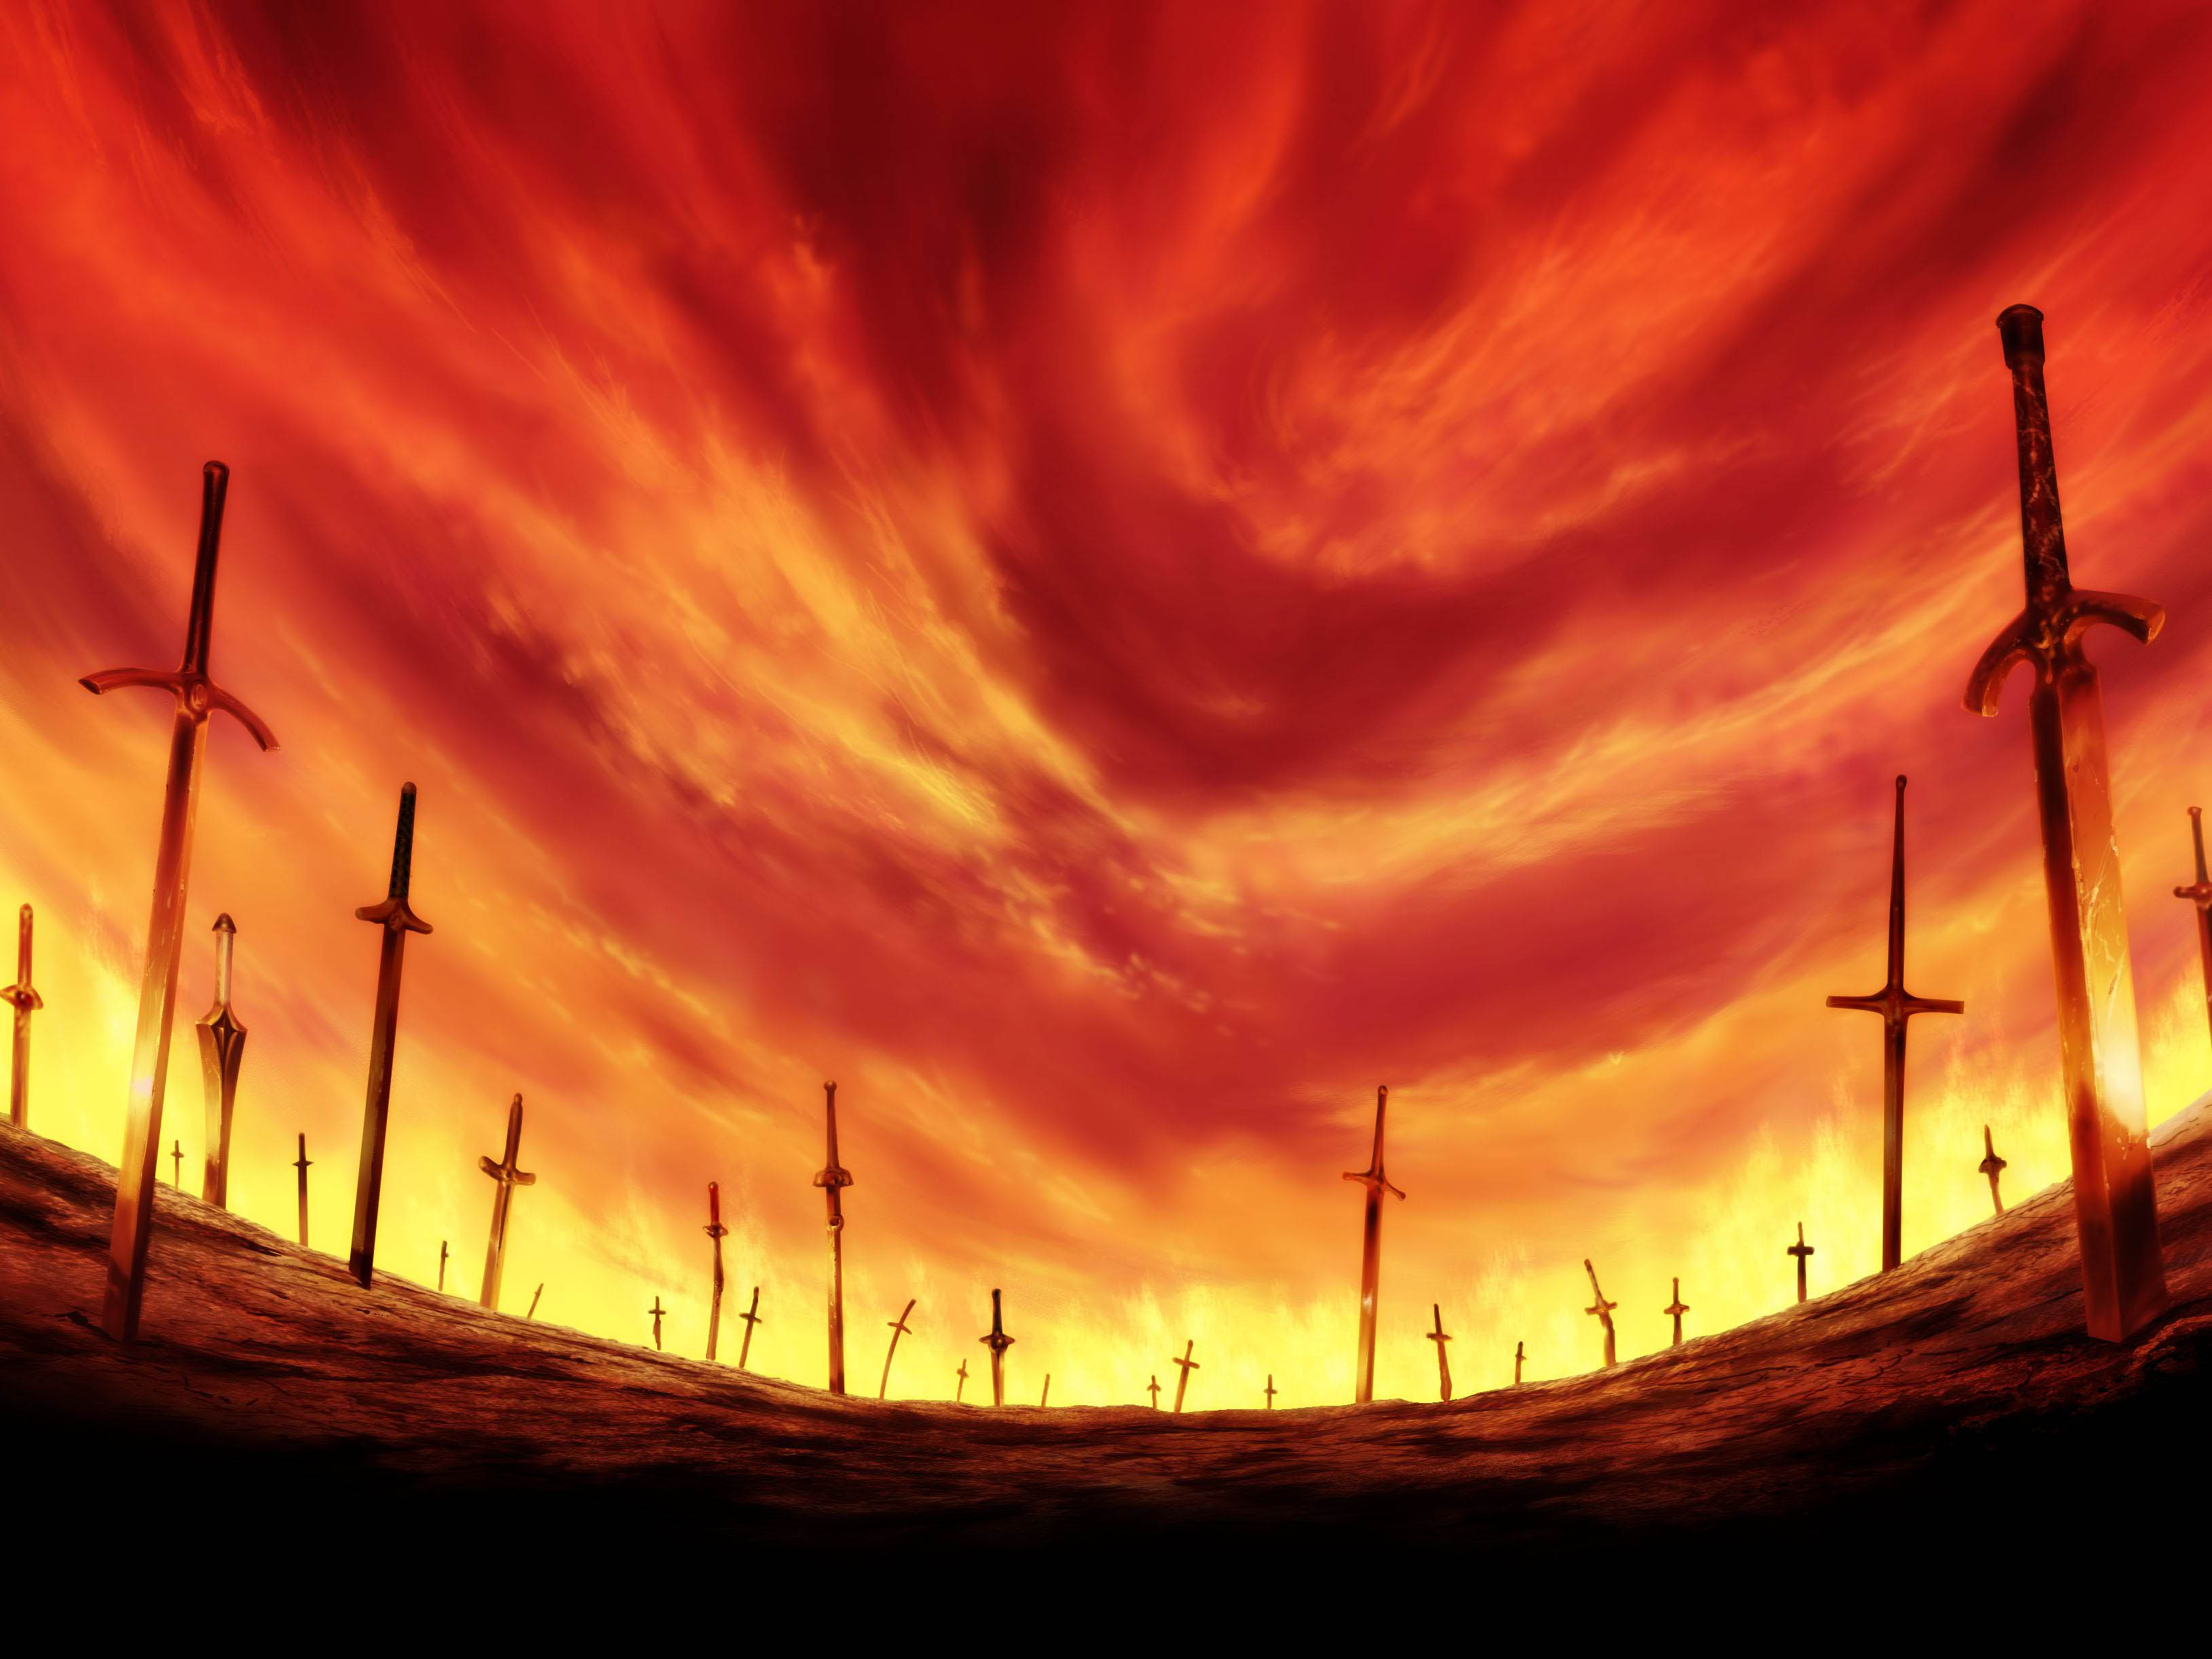 Fate Series Fate Stay Night Unlimited Blade Works Fate Stay Night Anime Sword 3259x2444